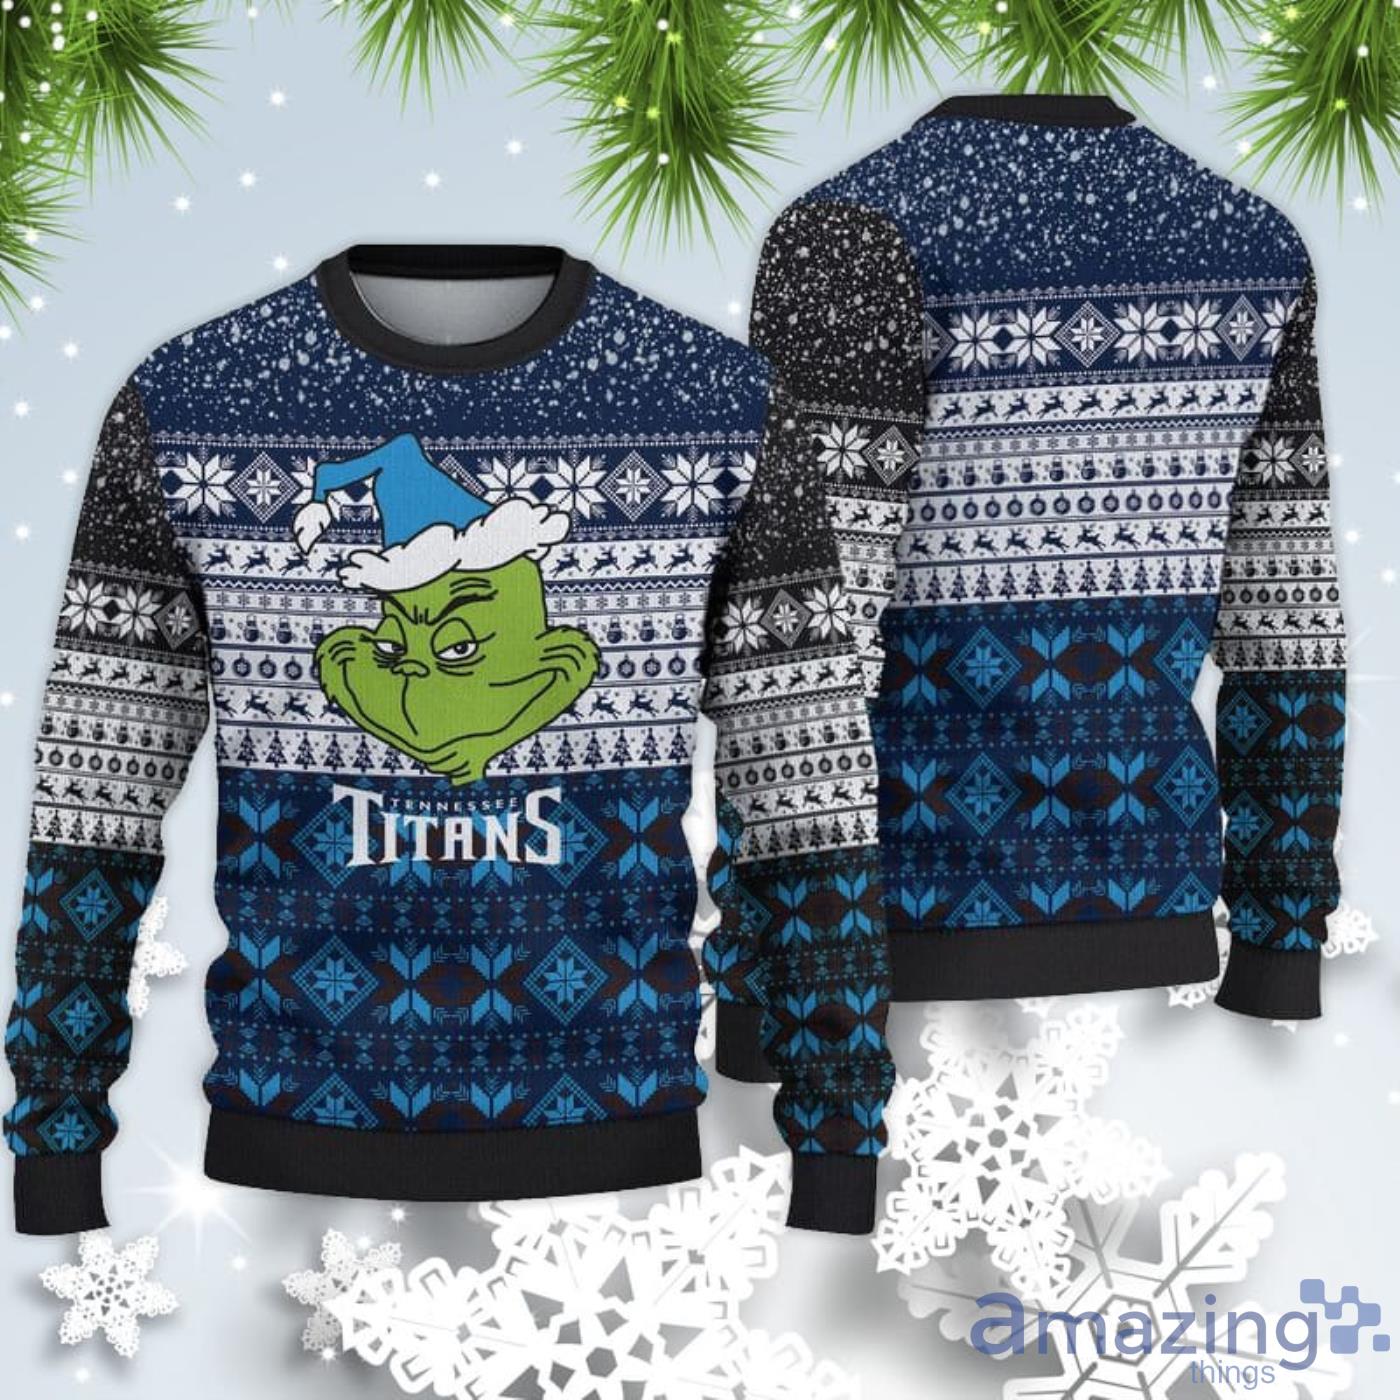 Tennessee Titans Christmas Grinch Sweater For Fans Product Photo 1